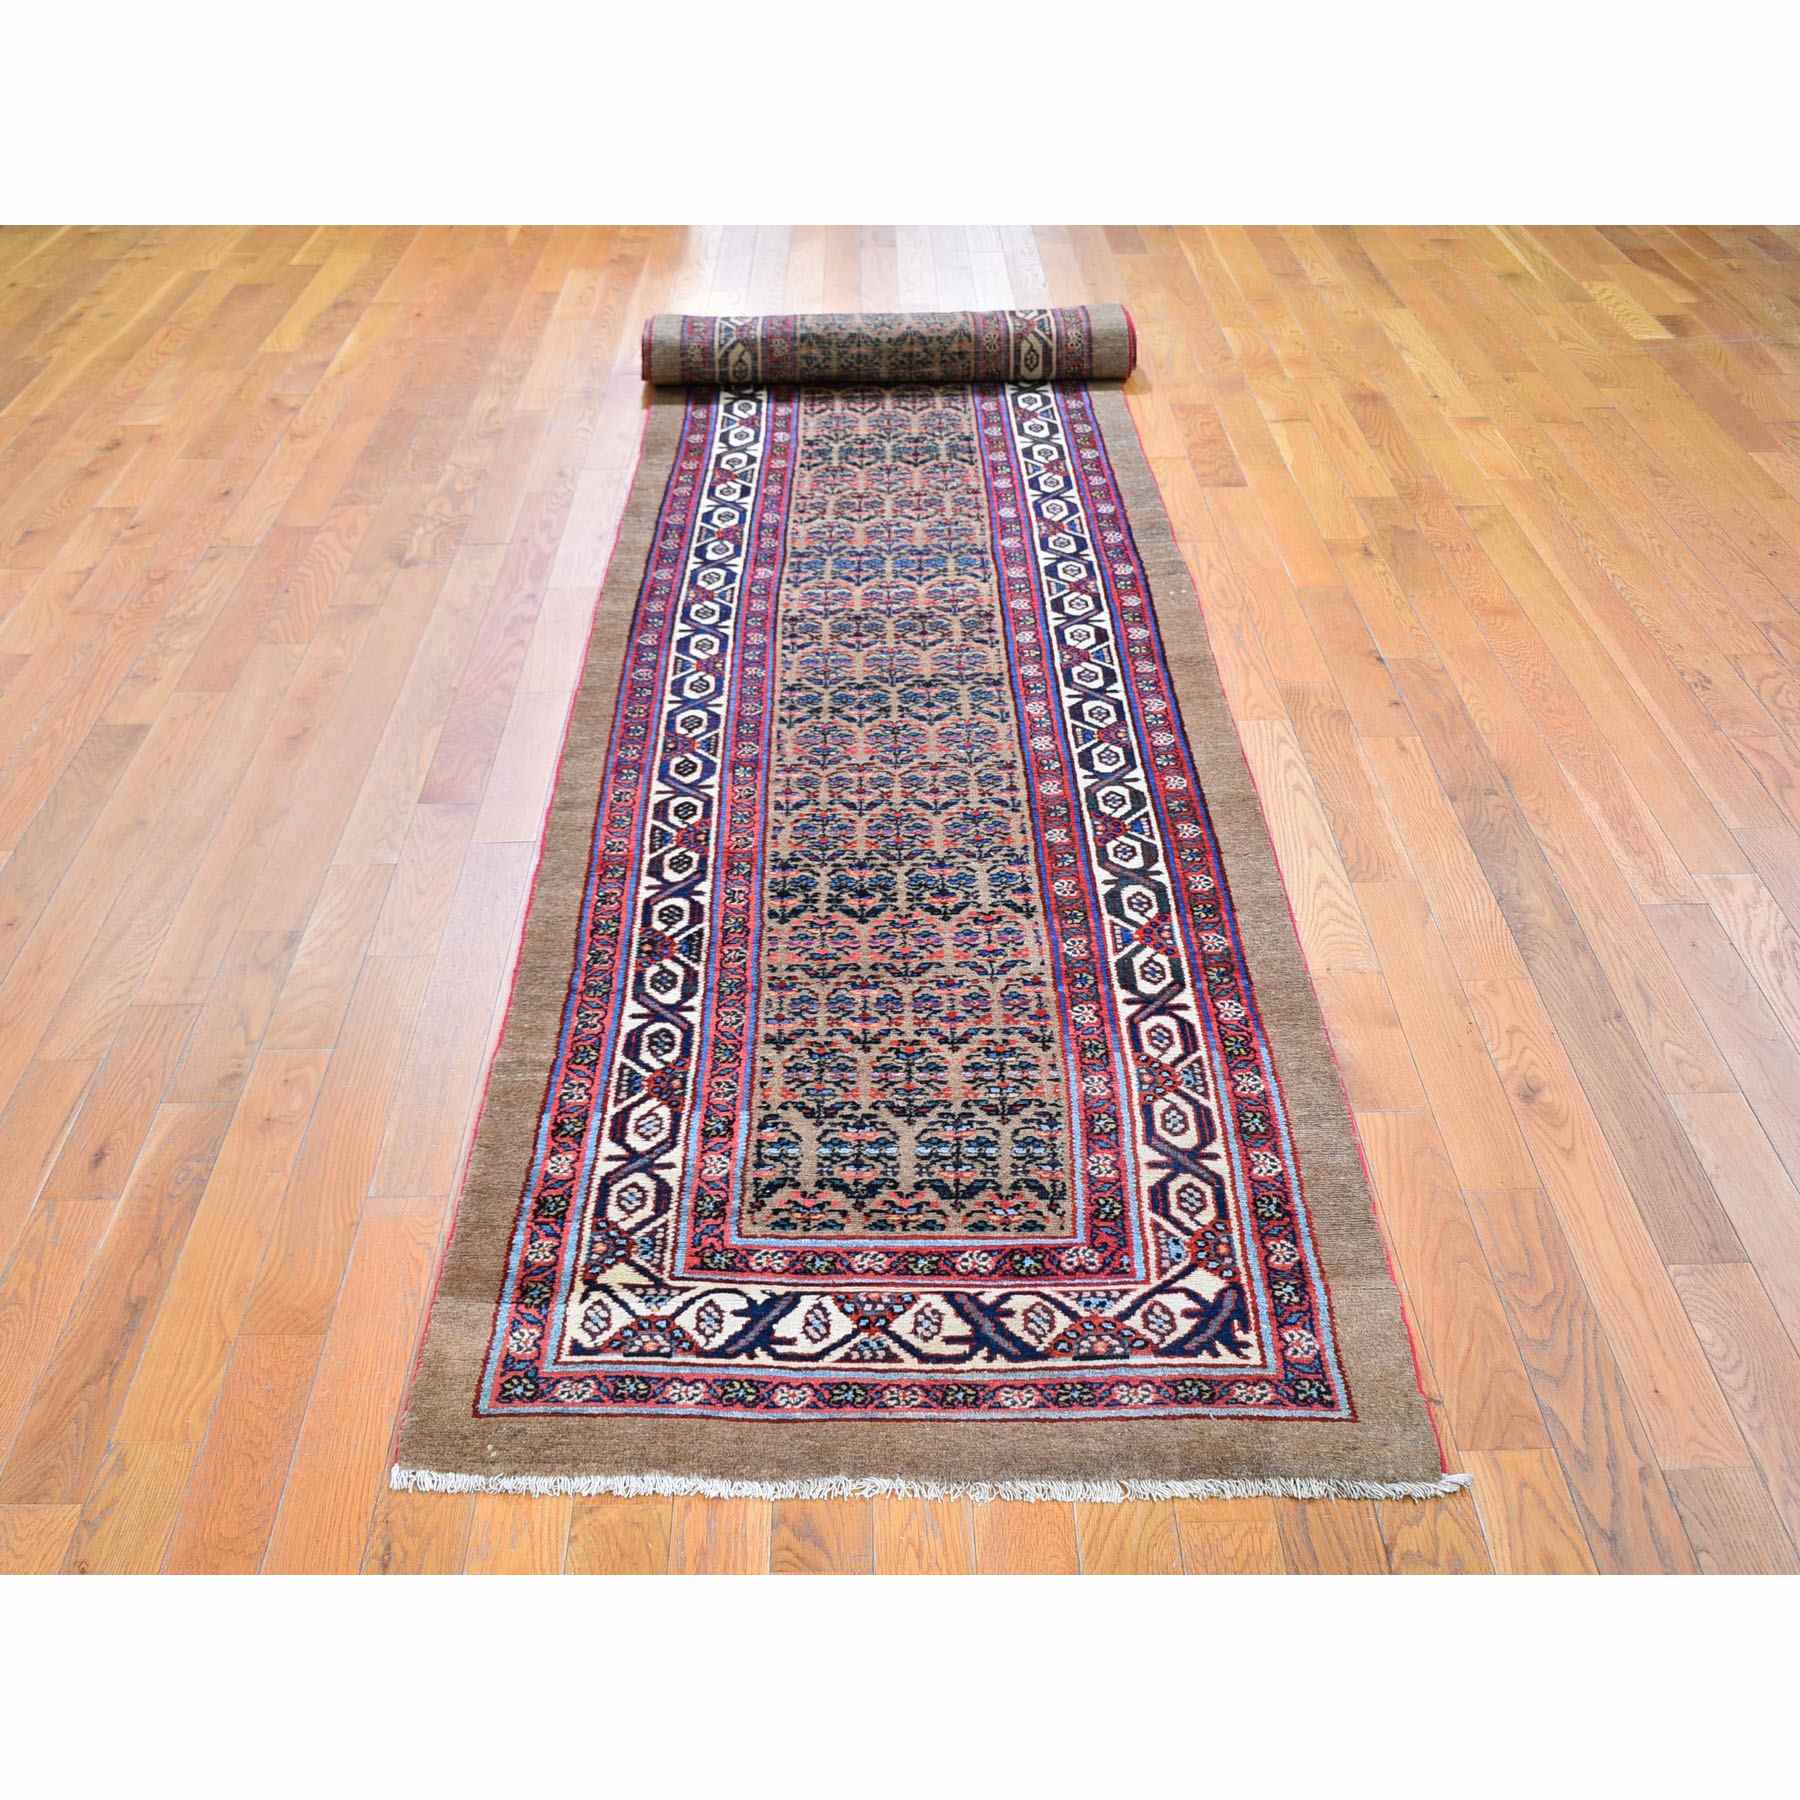 Antique-Hand-Knotted-Rug-297870